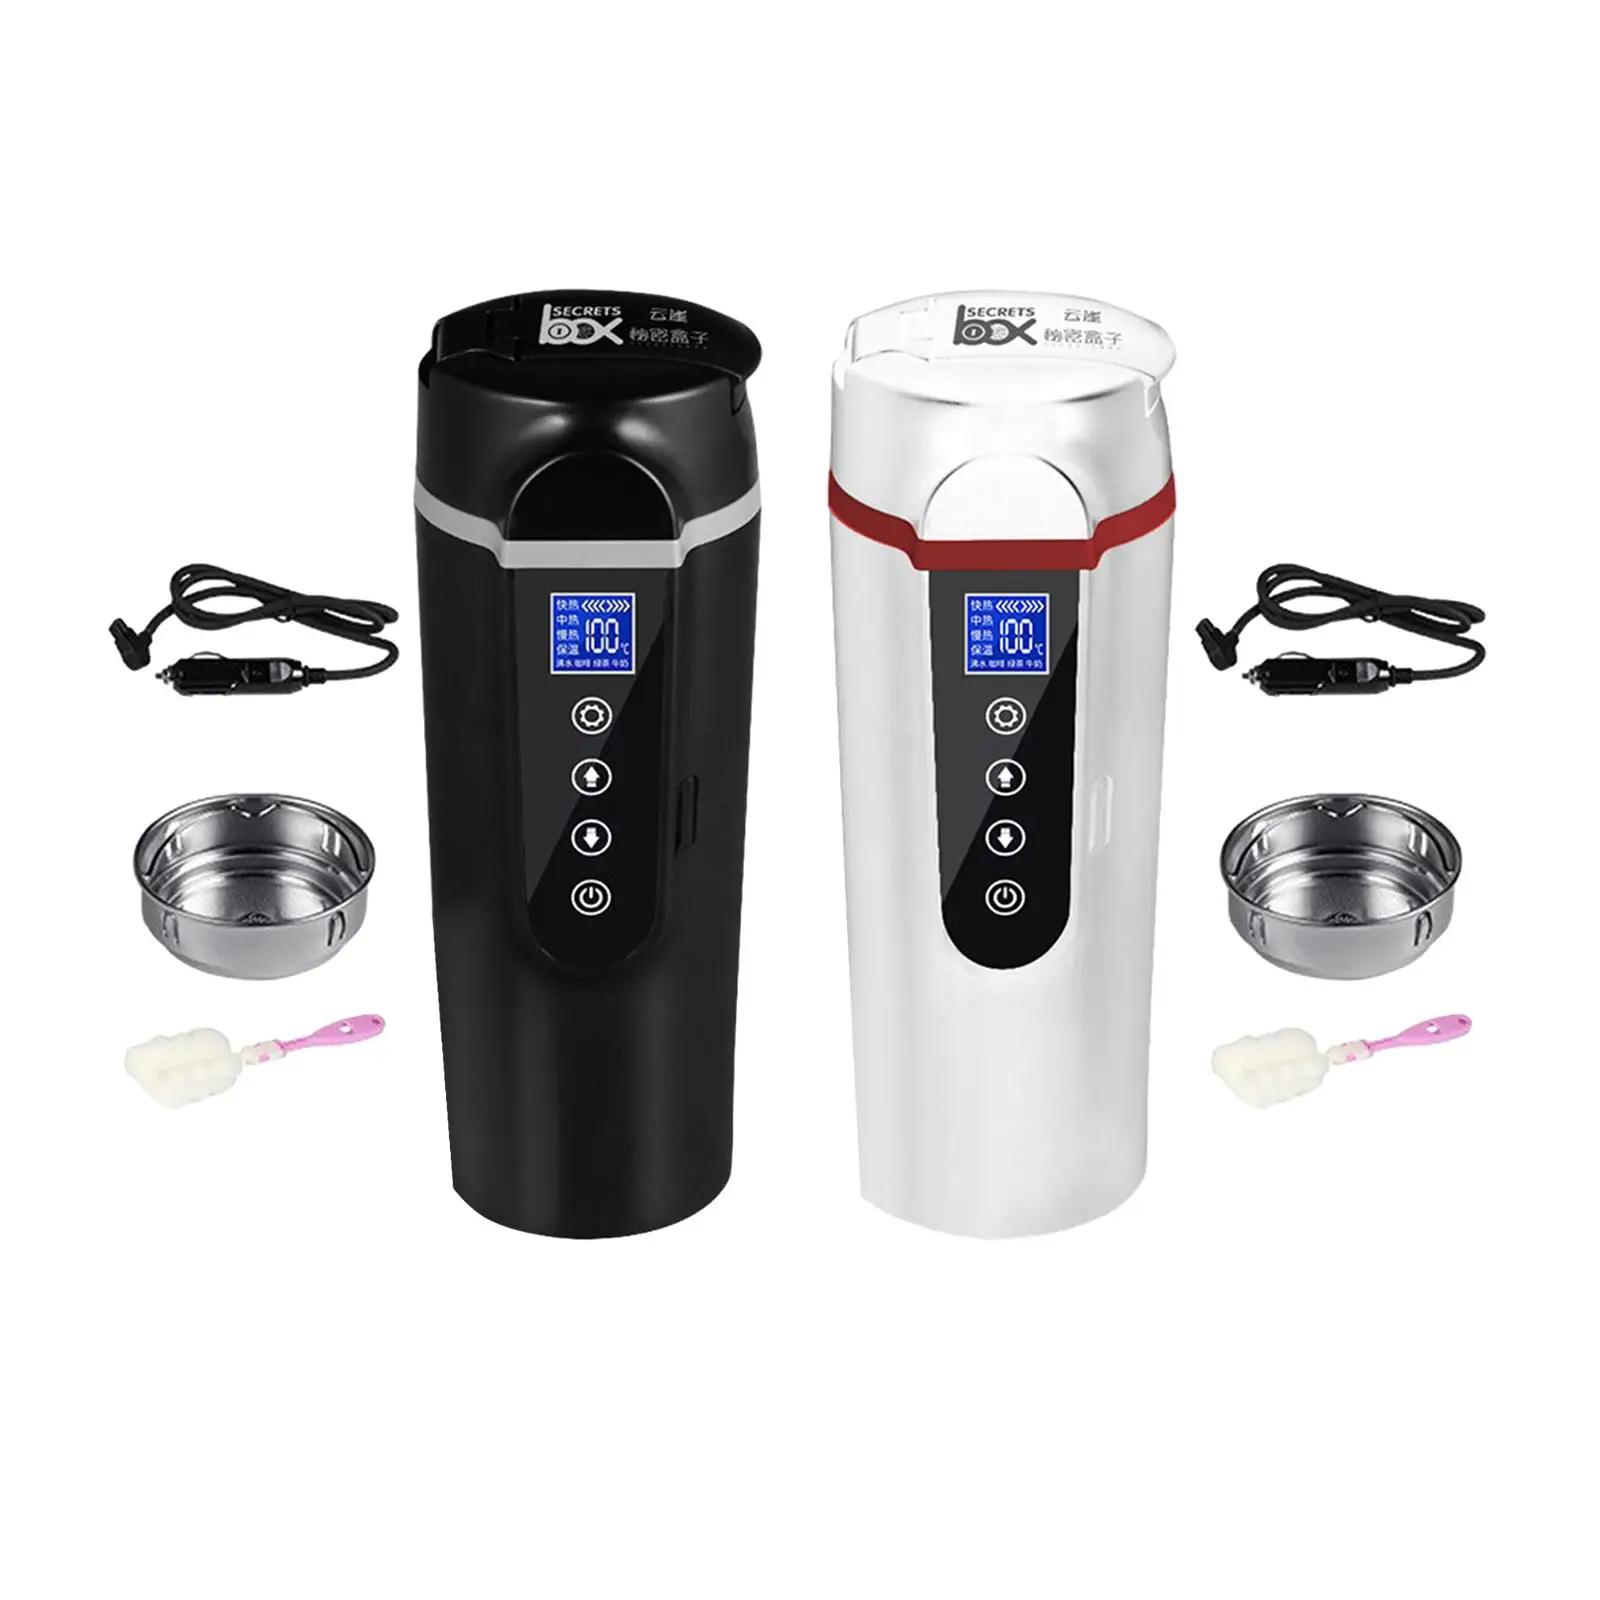 Car Heating Cup Portable Stainless Steel Hot Water Boiler Electric Tea Kettle for Car Truck Trip Camping Vehicles Tea Water Milk